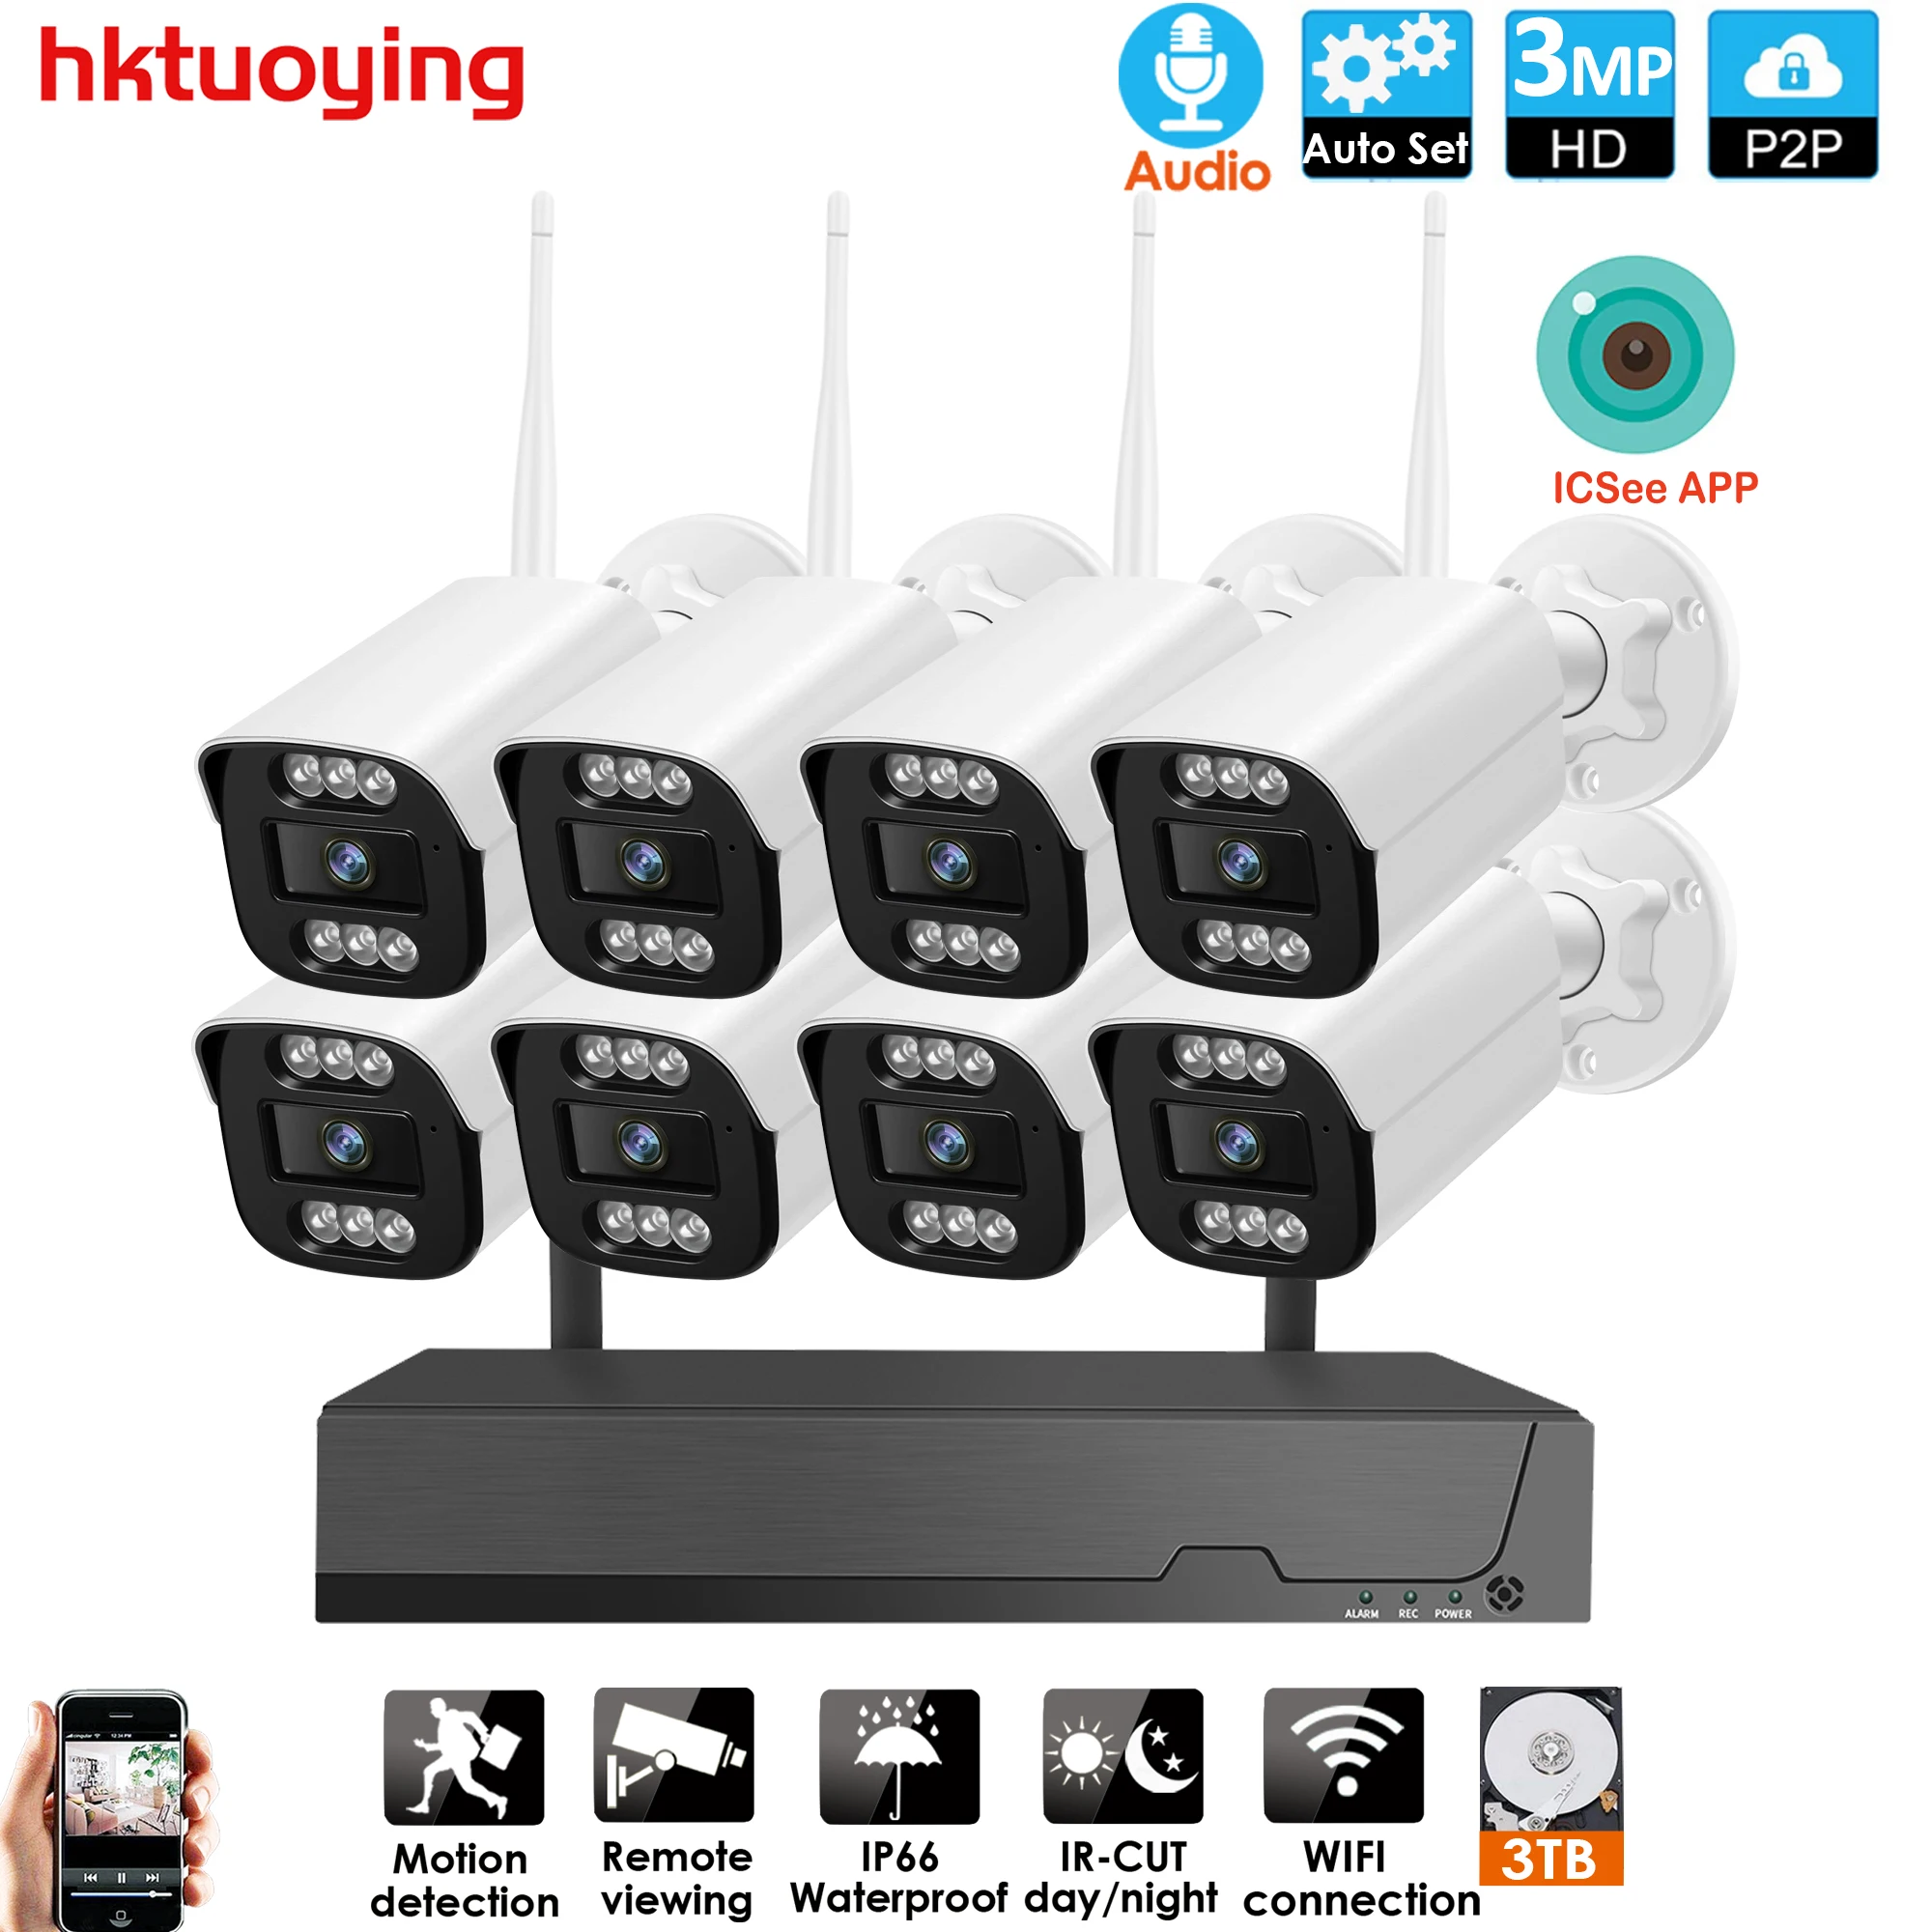 

XMEYE 8CH Audio CCTV System Wireless 3MP NVR Outdoor Indoor P2P Wifi IP Security Network Camera Surveillance Kit icsee APP